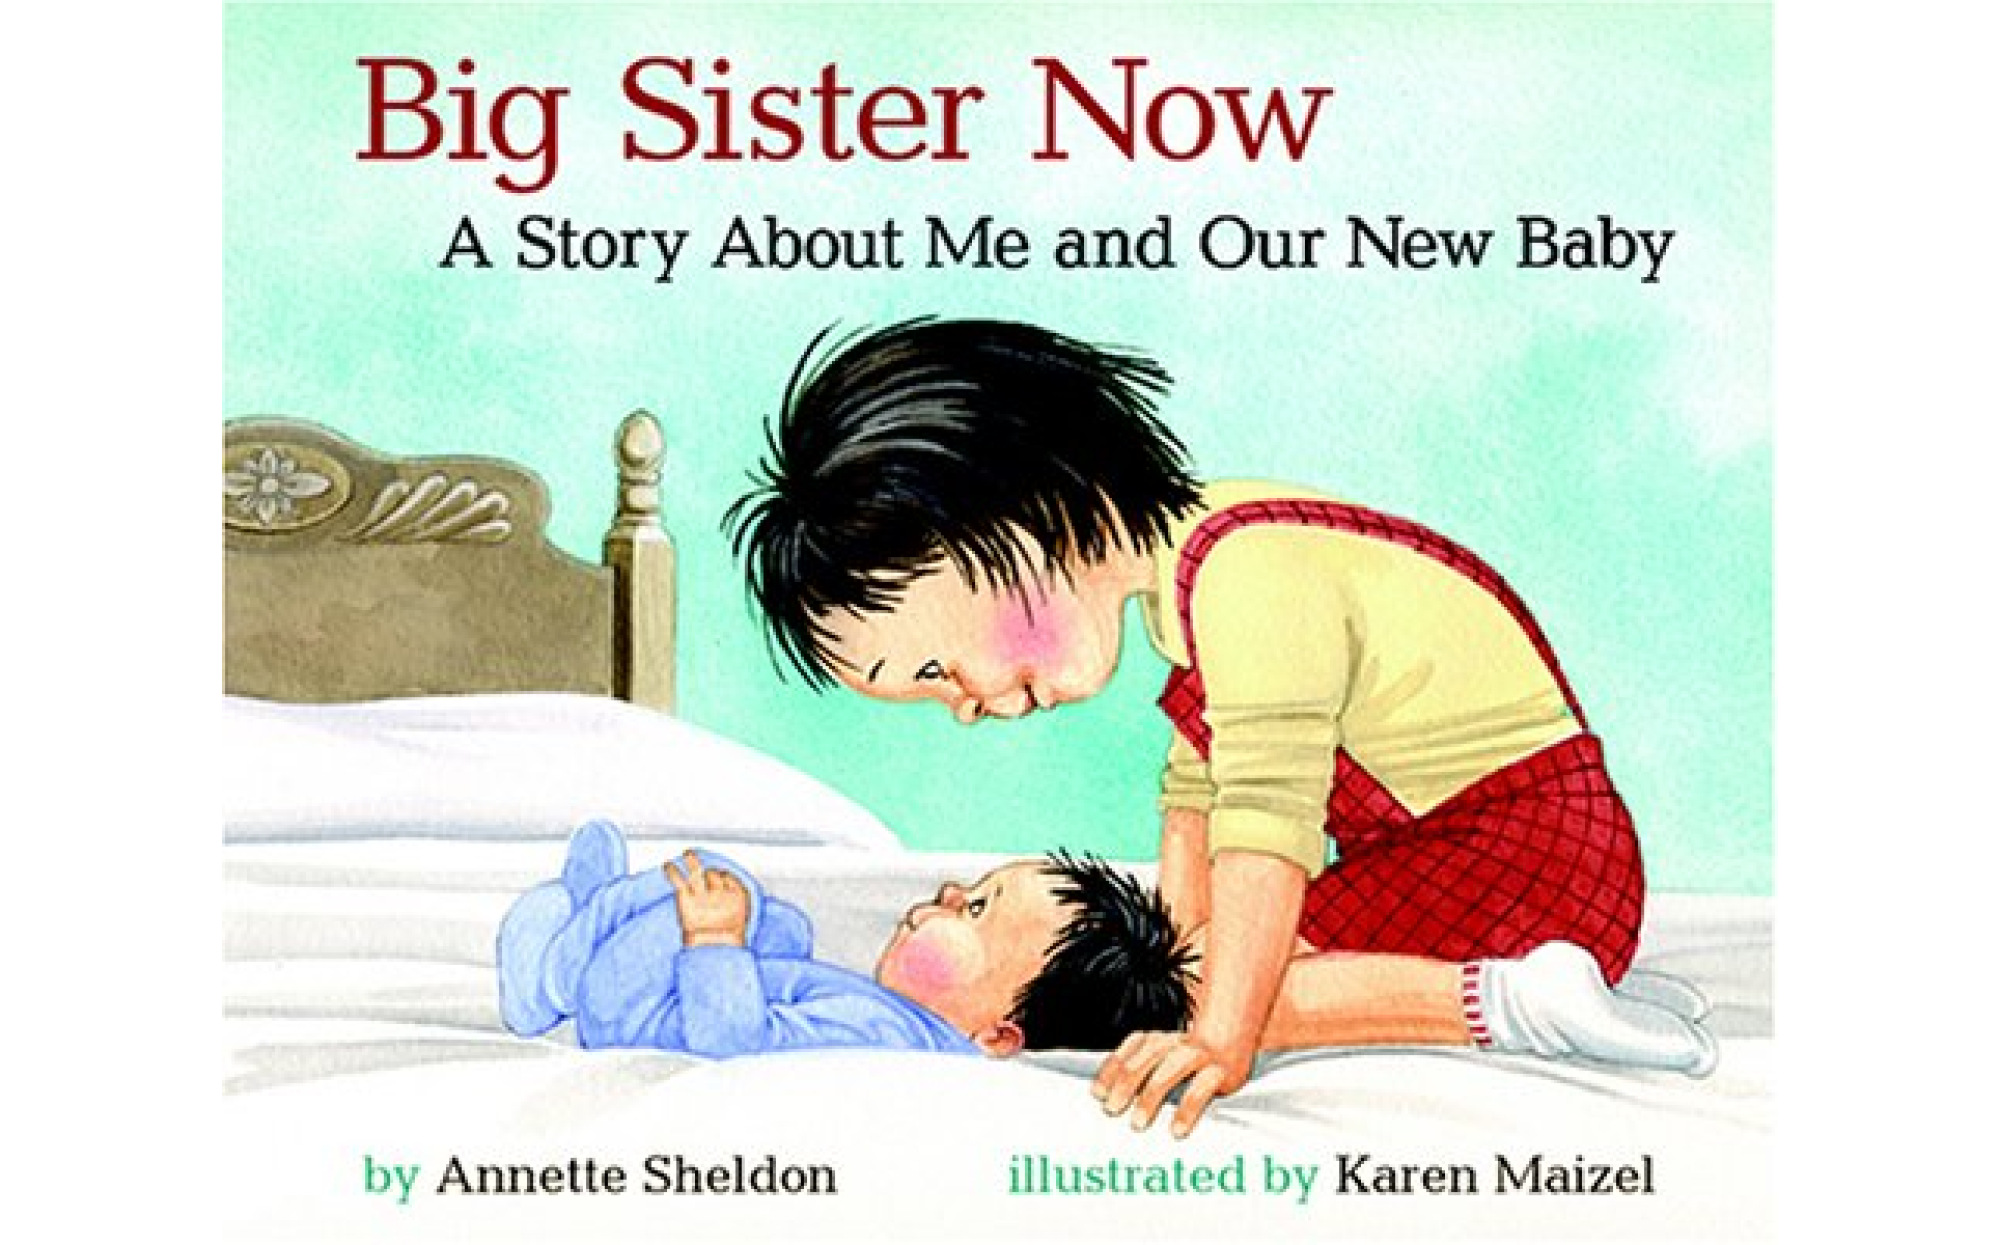 A New Baby книга про. Baby story. Jane and dan a brother and a. Brother and sister with a story. Your sister english